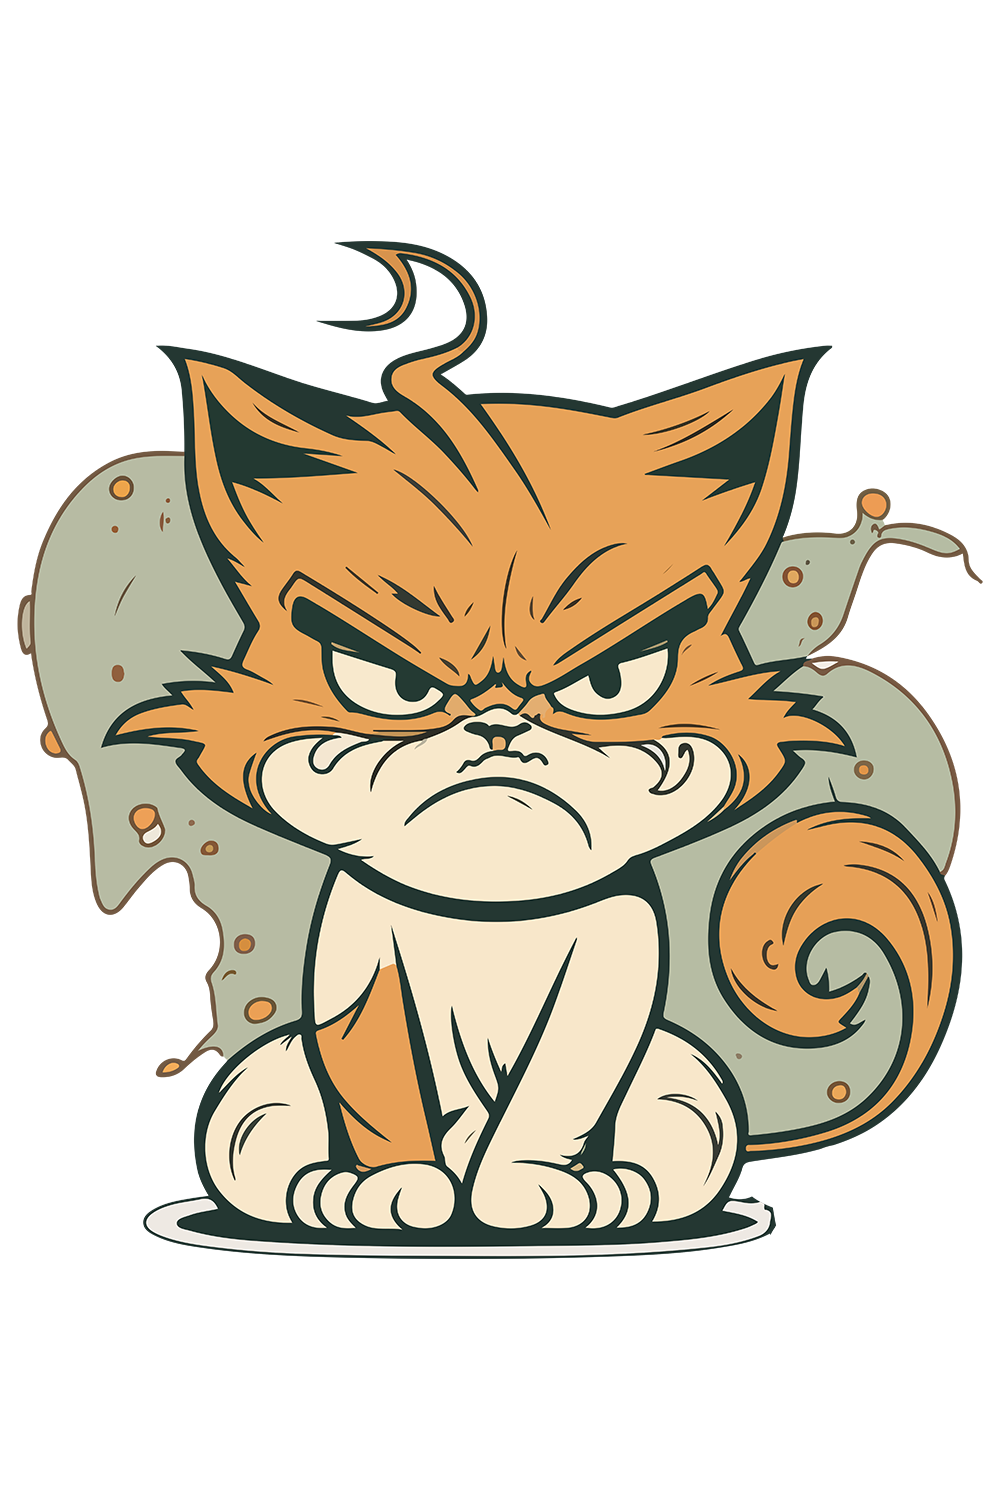 Cartoon cat with a sad look on its face.